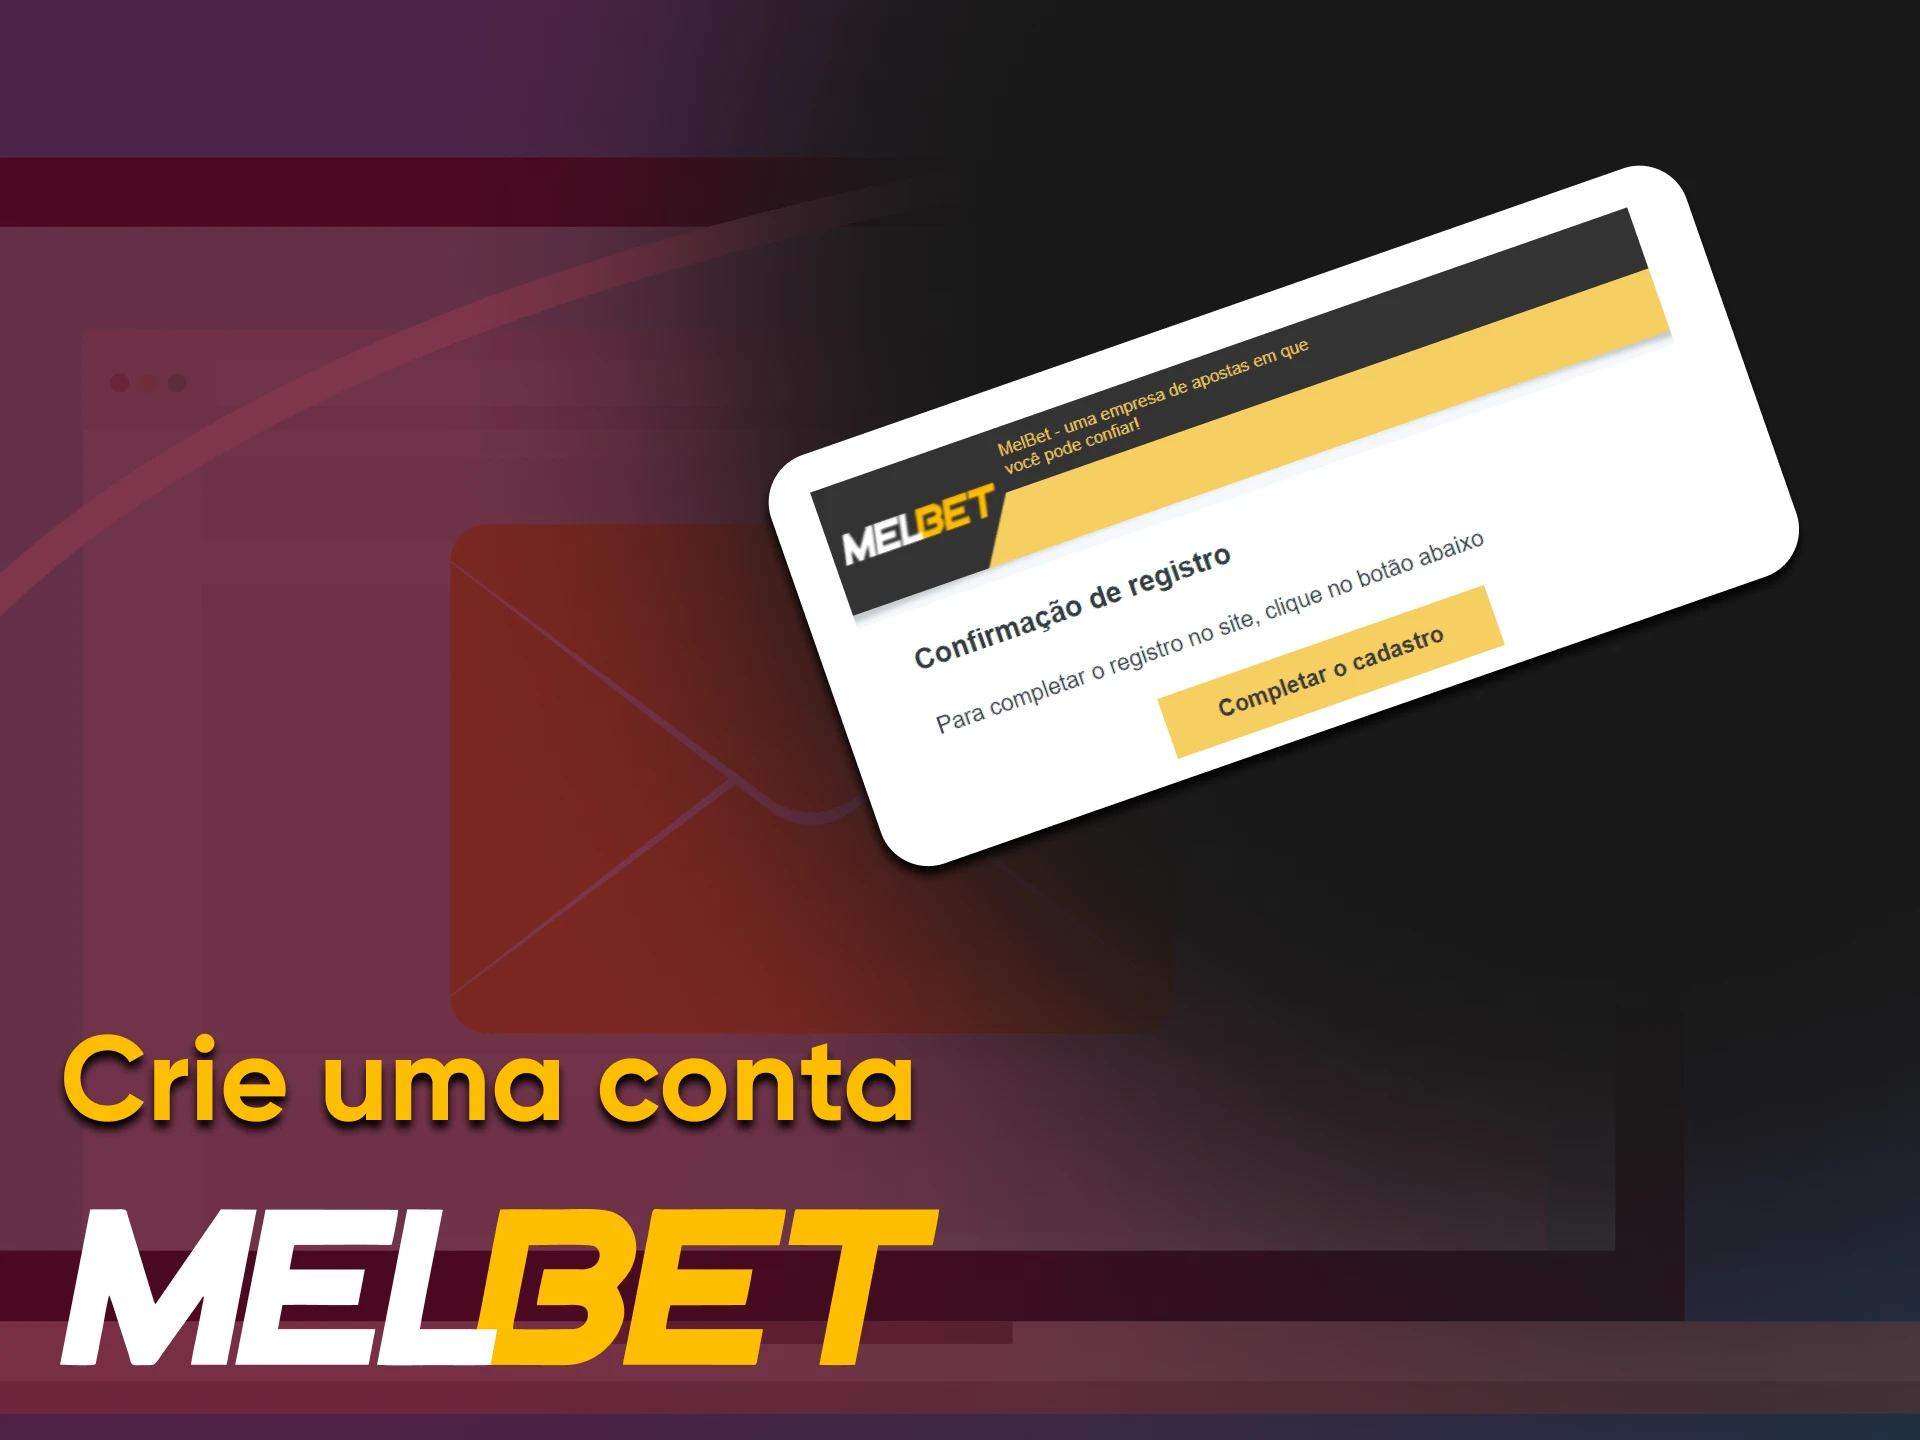 If unable to replenish deposit, confirm Melbet account request.